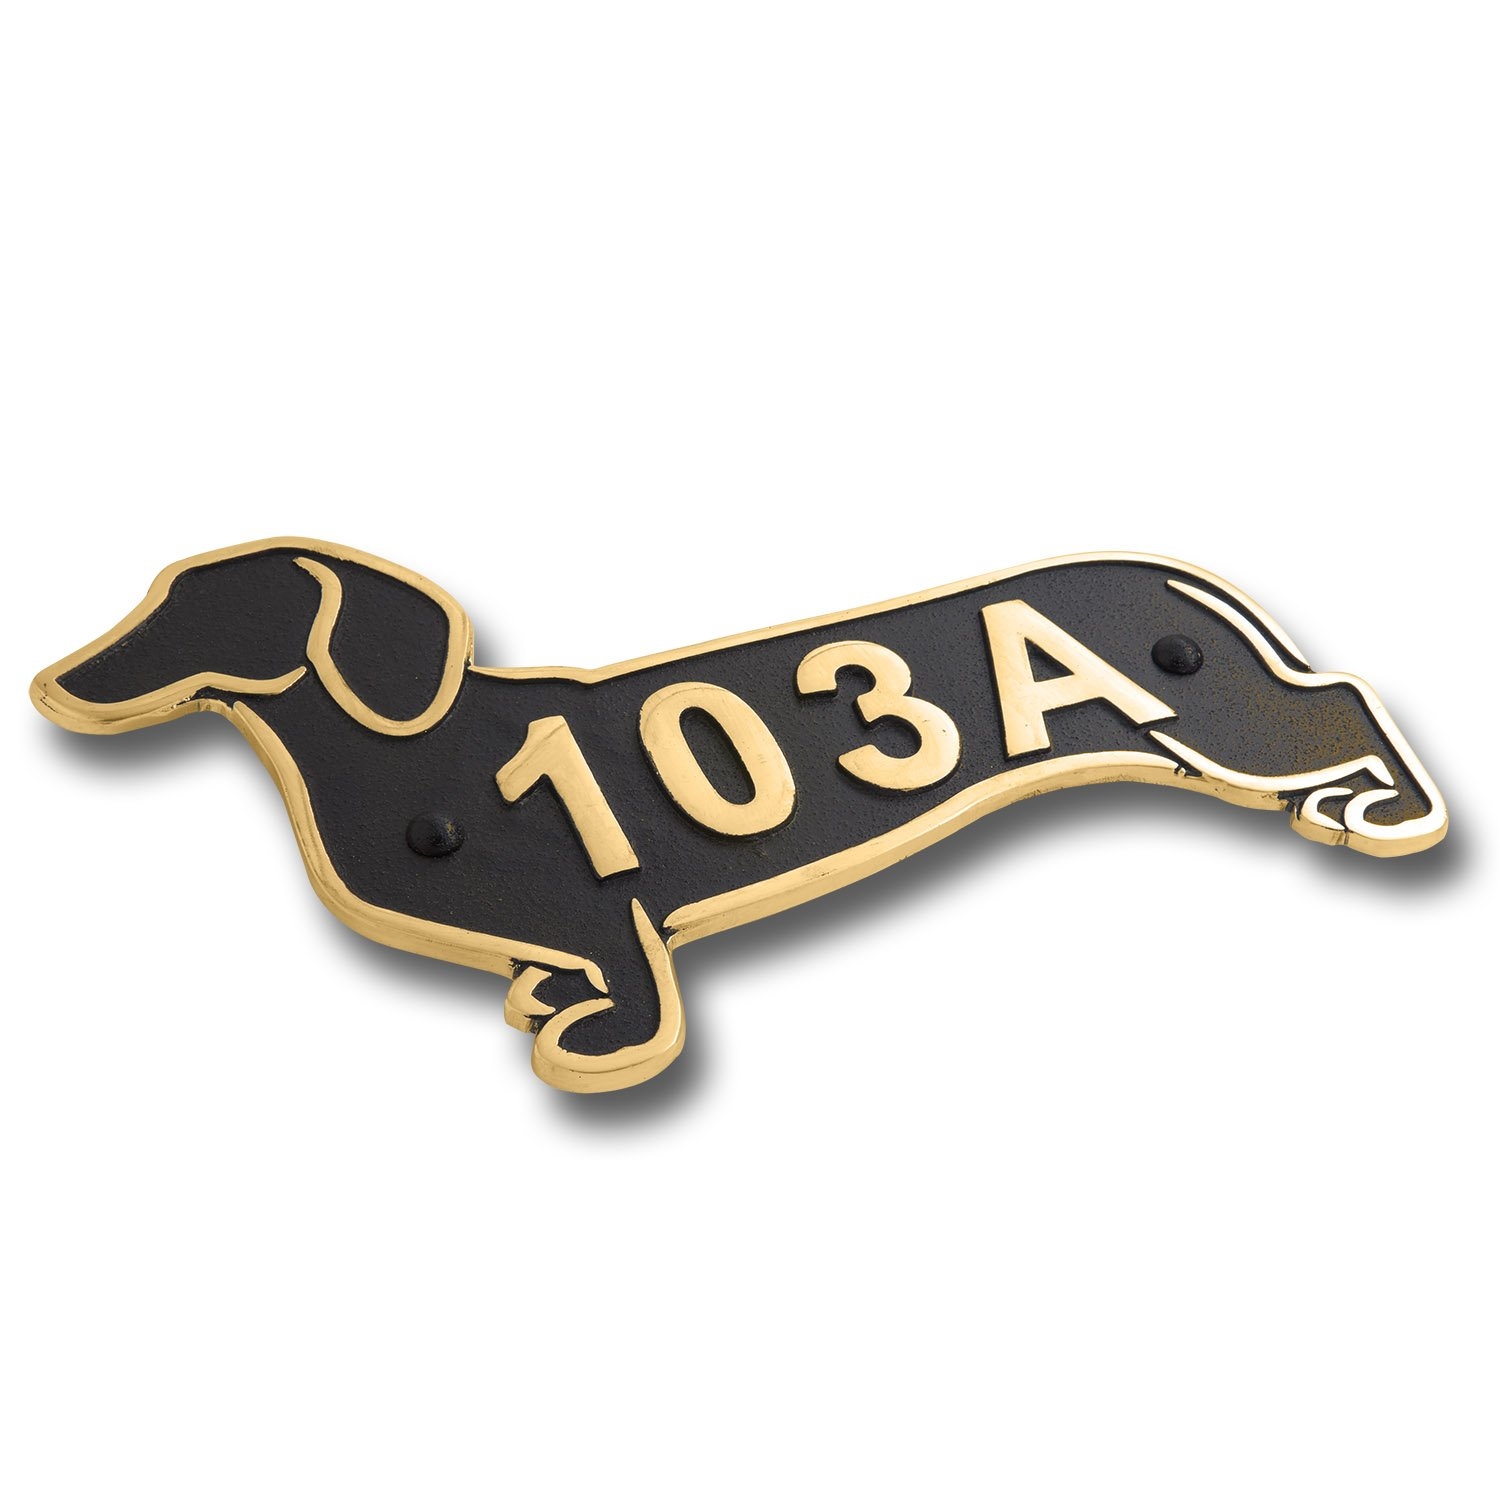 Dachshund Metal House Number Address Plaque. Sausage Dog Gift Idea For A Dachshund Owner. Yard Or Garden Dachshund Décor Makes A Great Gift For Him Or Her – Brass & Purple